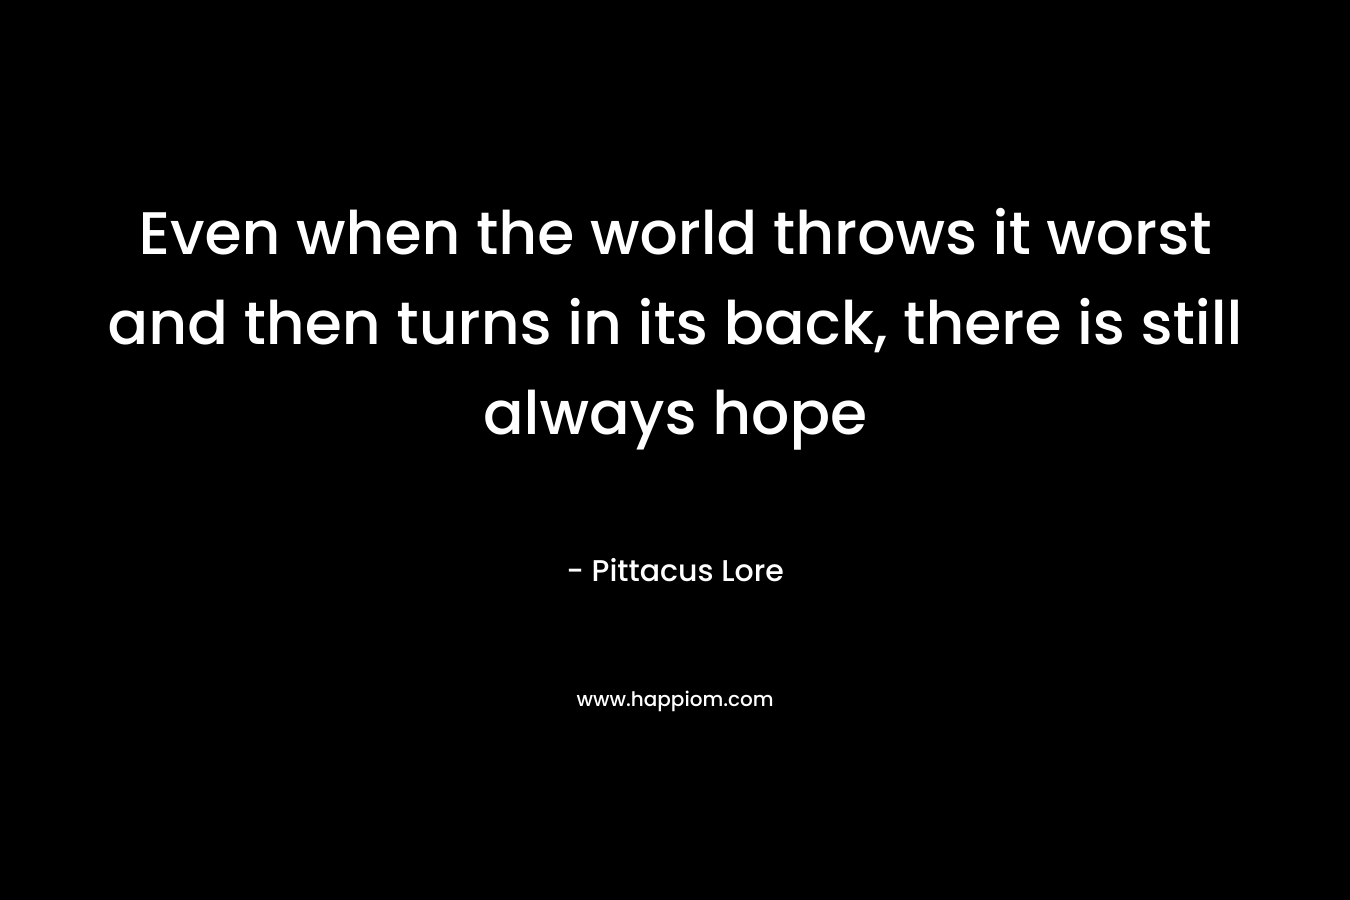 Even when the world throws it worst and then turns in its back, there is still always hope – Pittacus Lore